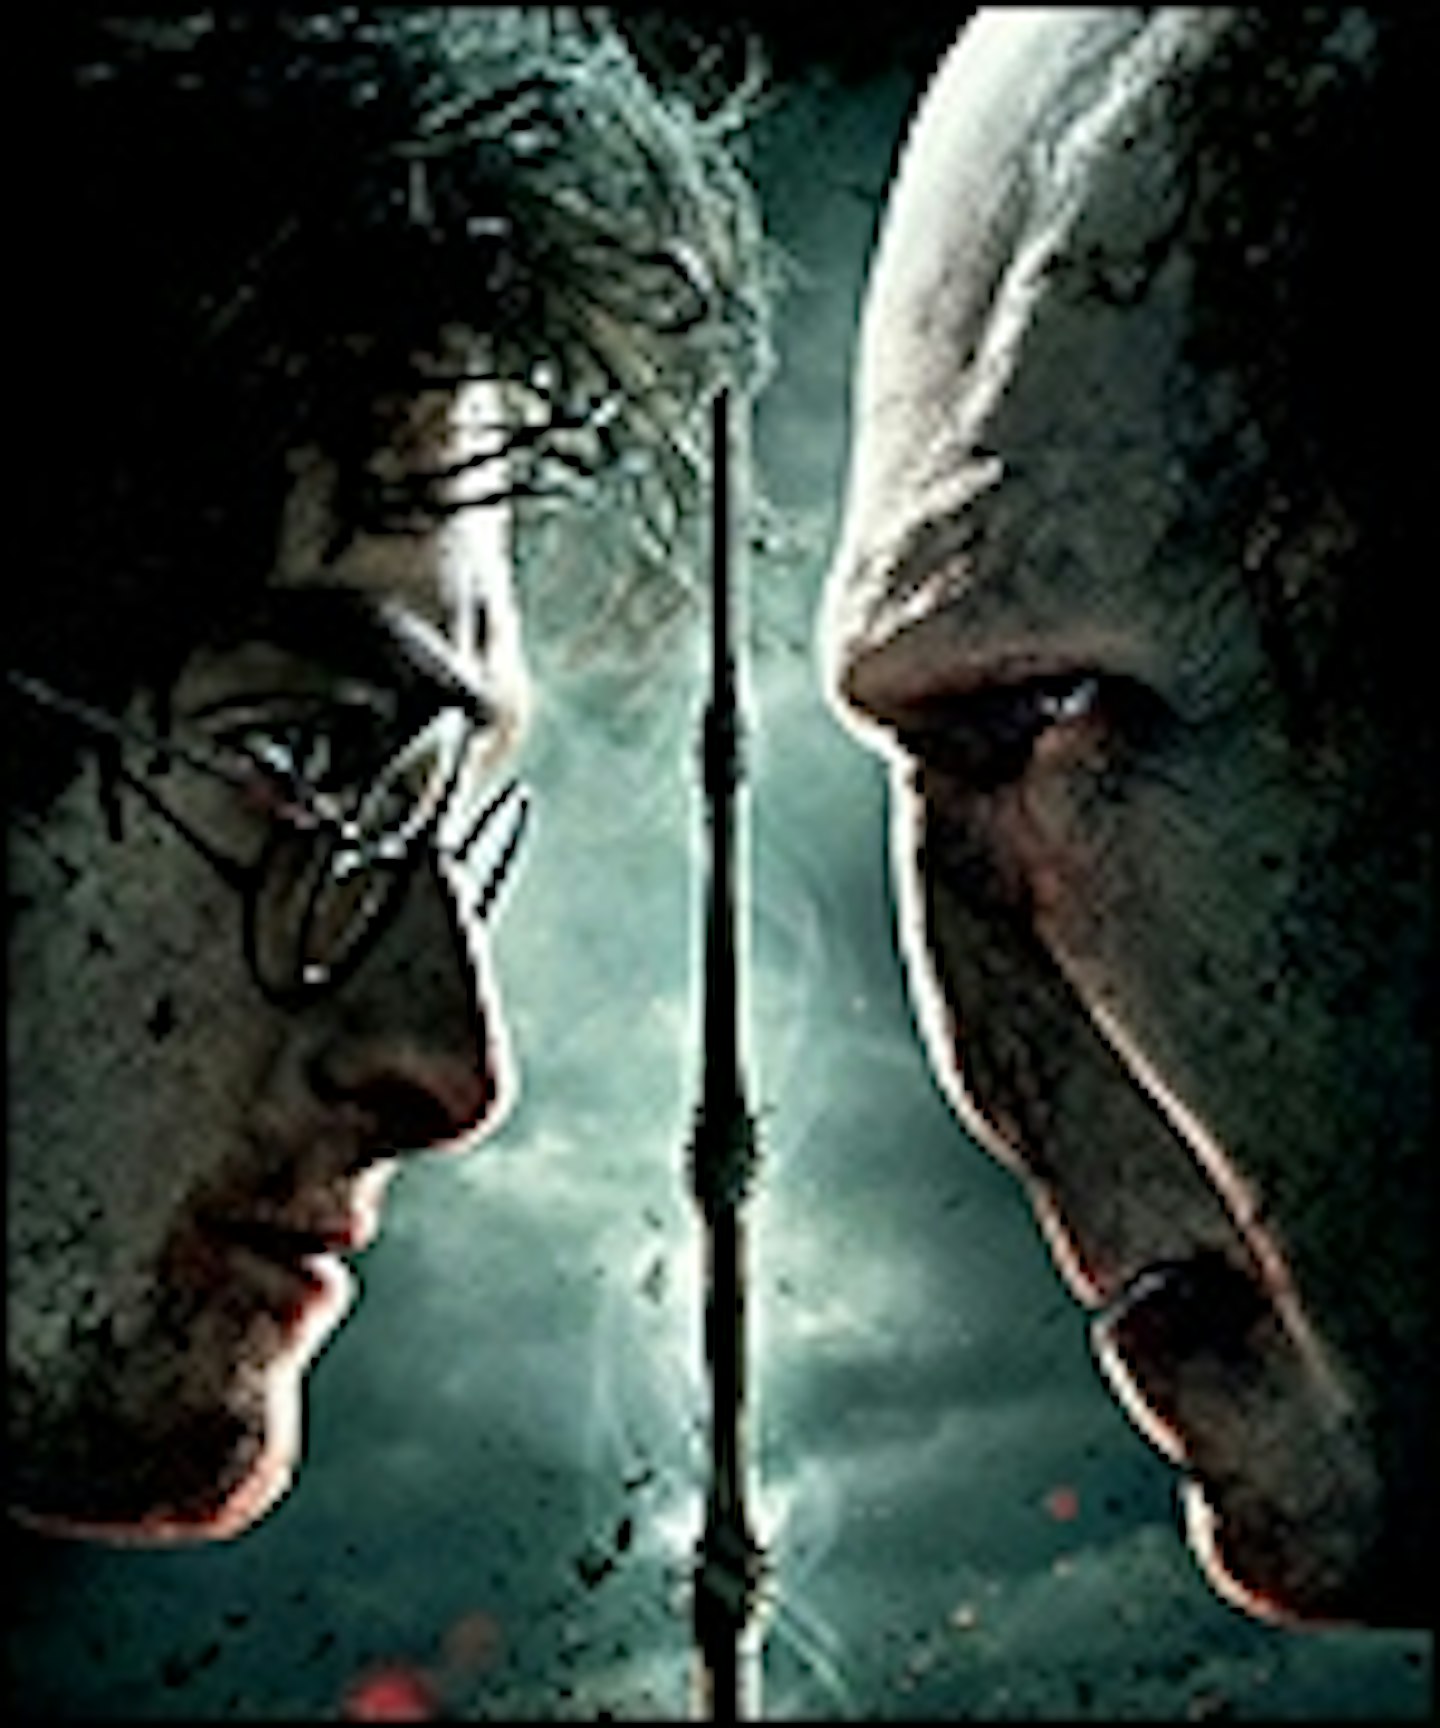 New Deathly Hallows Part 2 Trailer